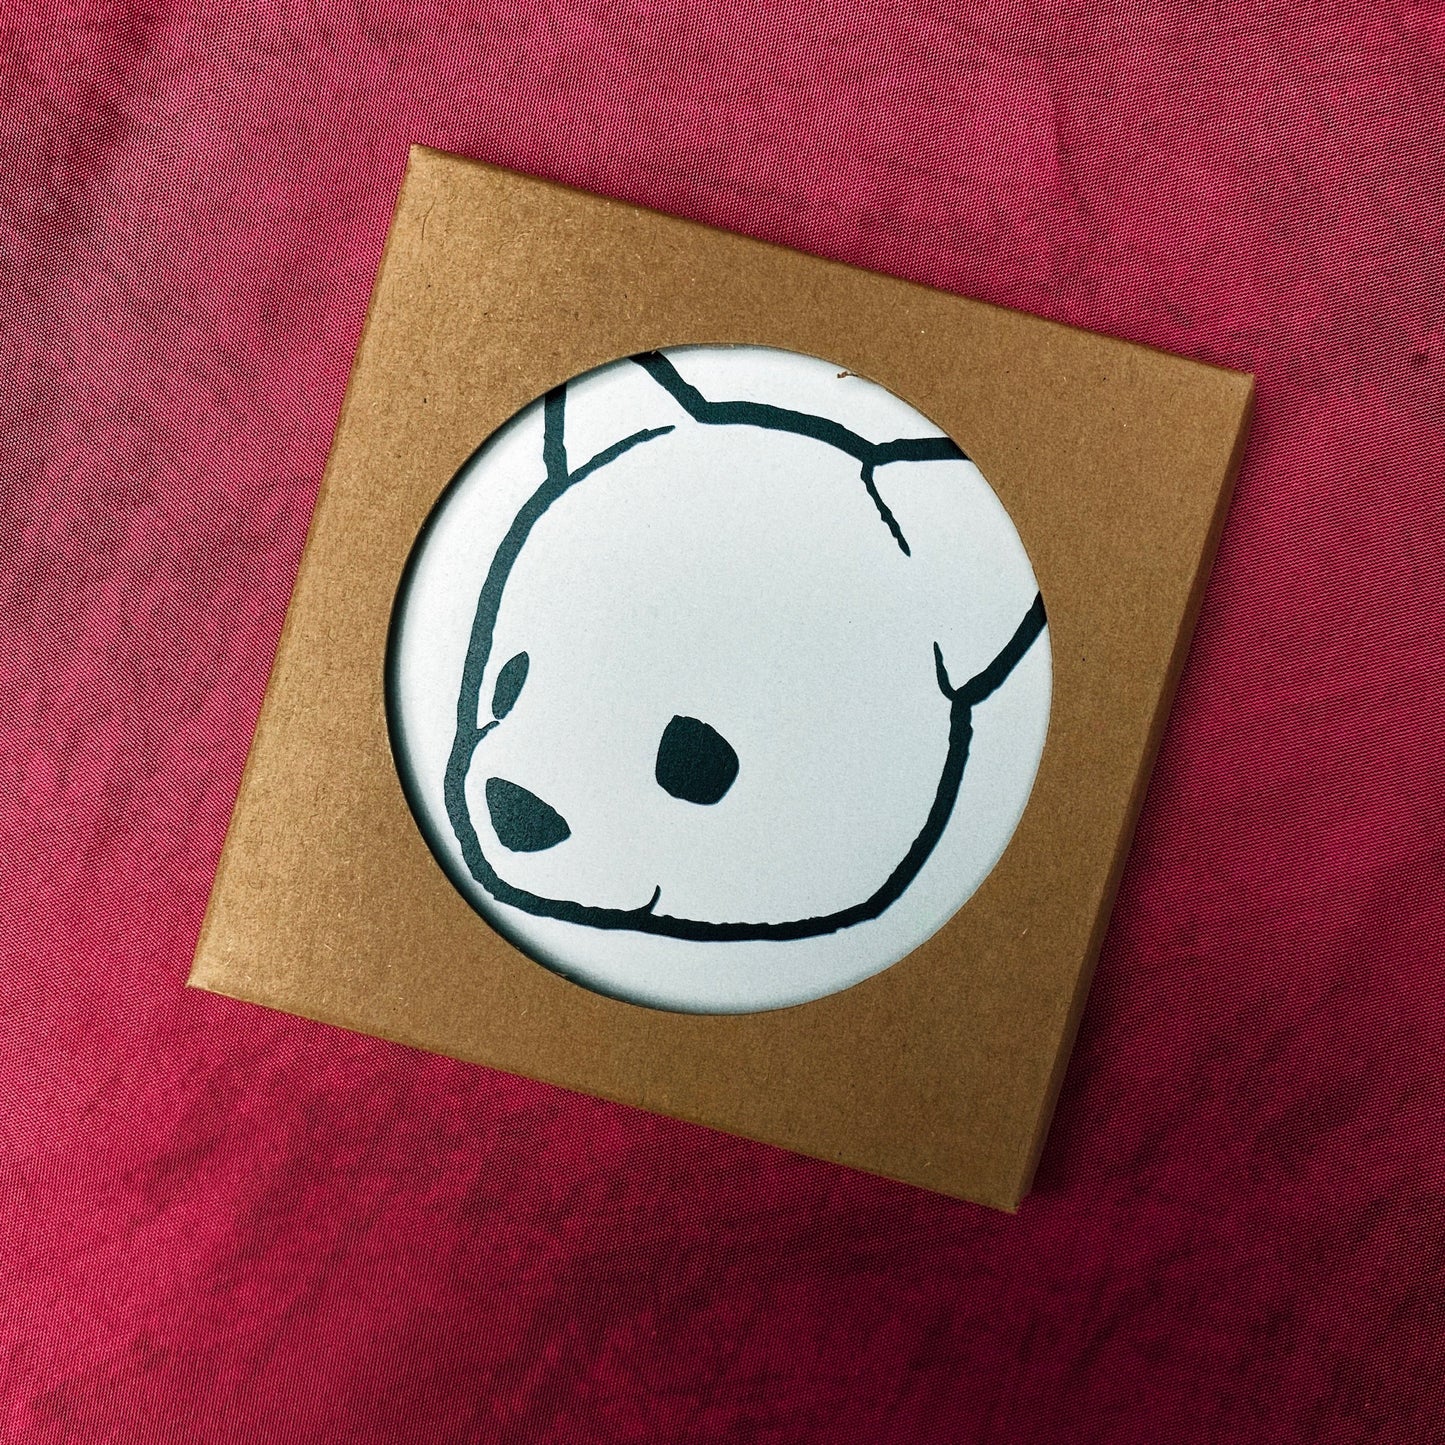 Ceramic coaster featuring Luke Chueh's bear head in its packaging. Limited-edition of 100 published by Plush Art Club. 